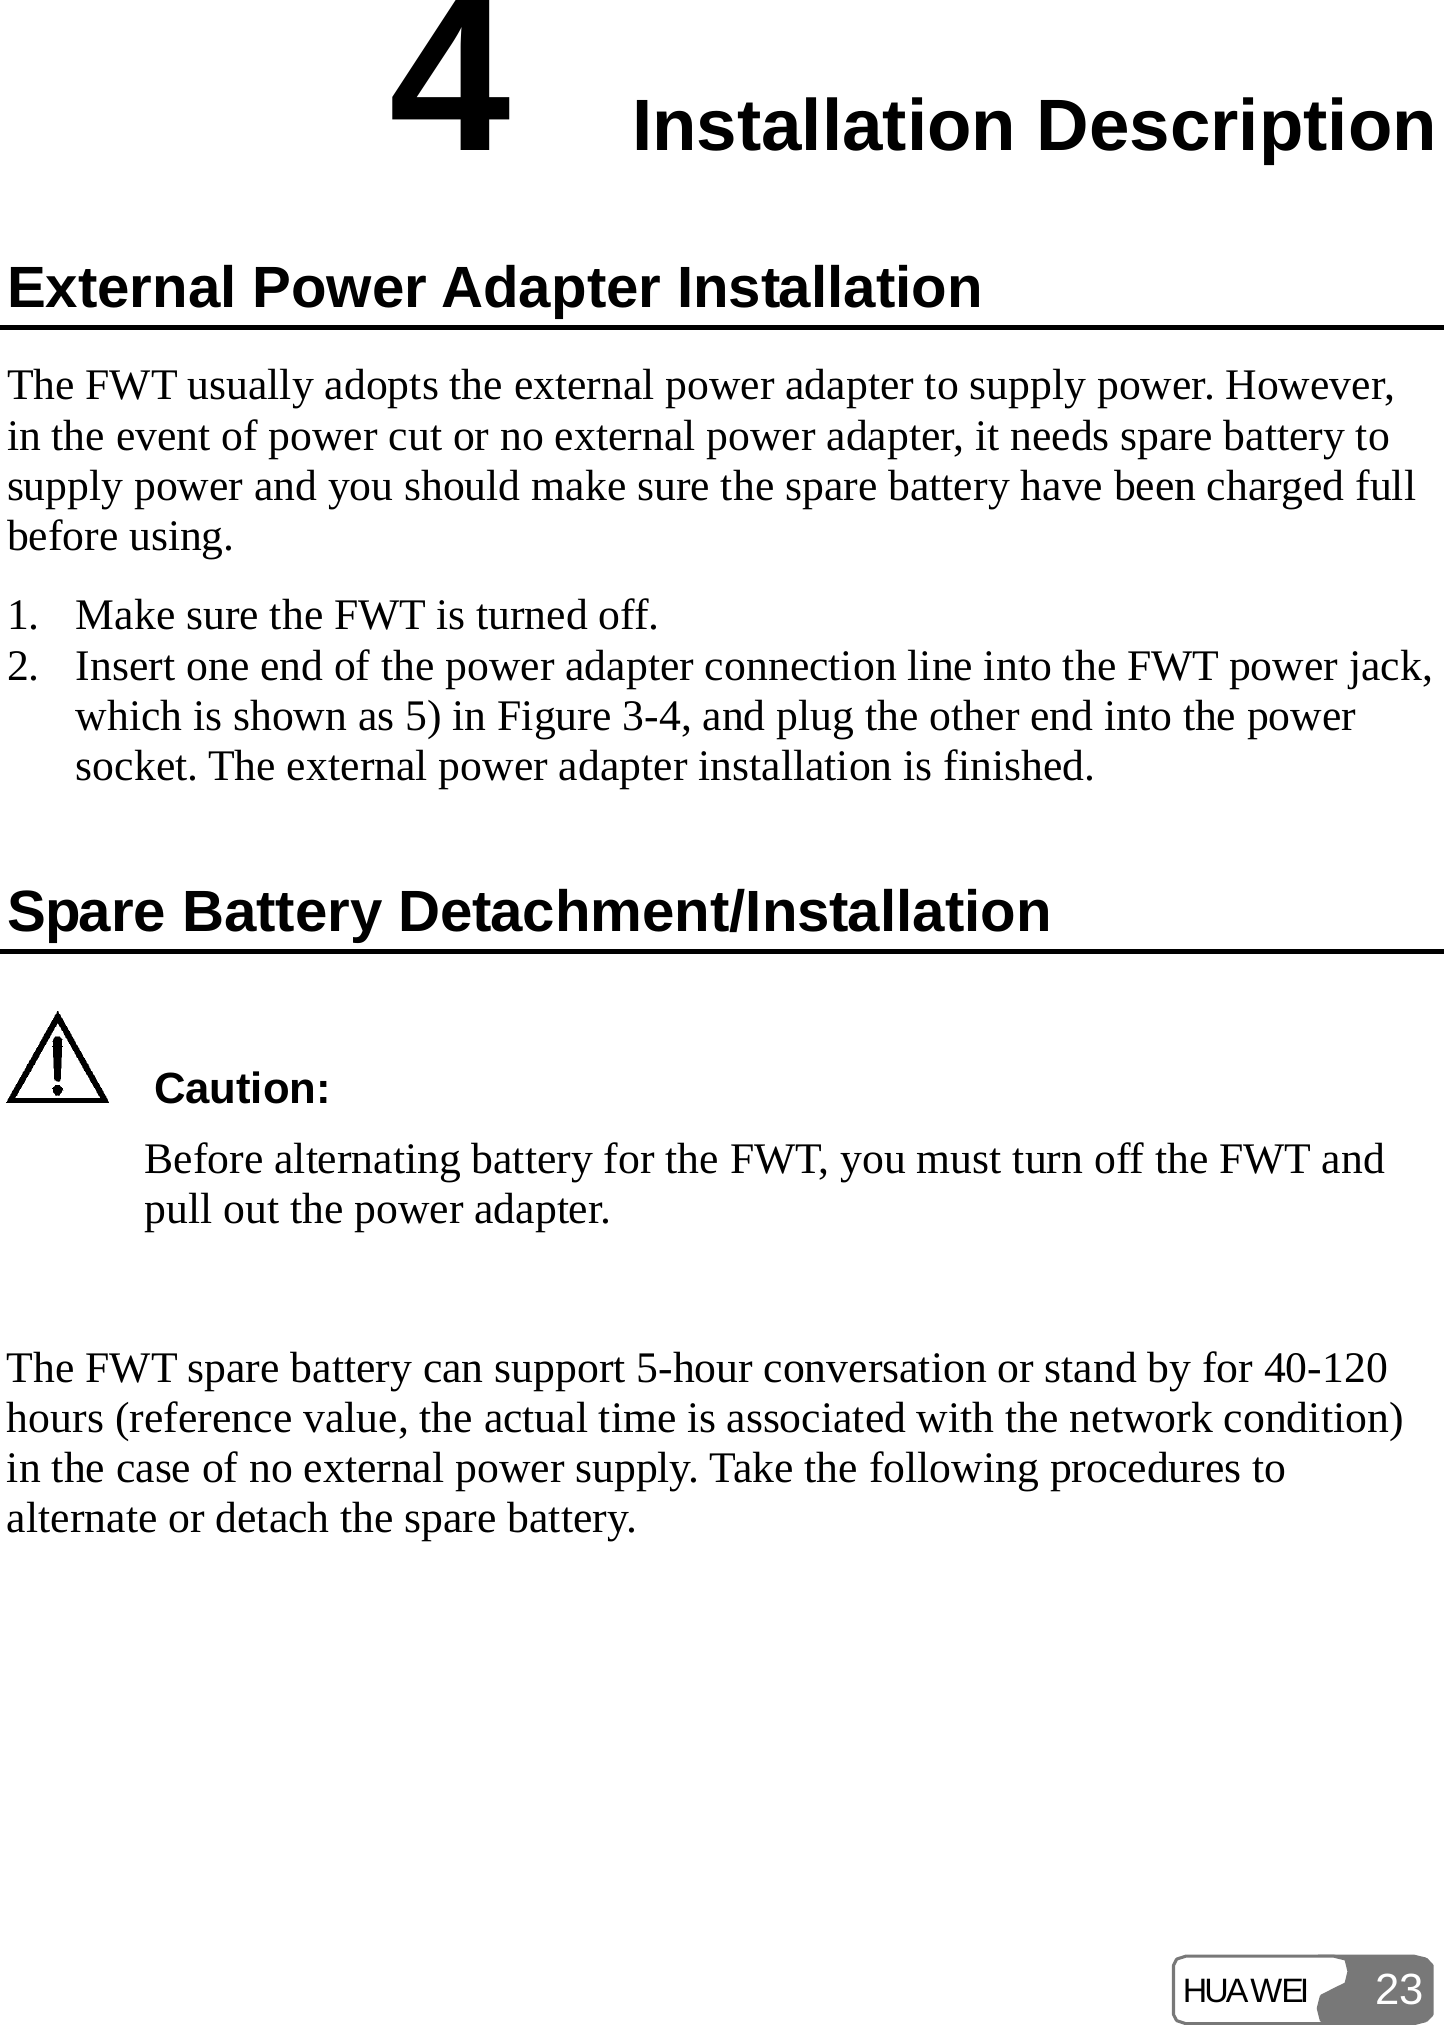 HUAWEI 234  Installation Description External Power Adapter Installation The FWT usually adopts the external power adapter to supply power. However, in the event of power cut or no external power adapter, it needs spare battery to supply power and you should make sure the spare battery have been charged full before using. 1. Make sure the FWT is turned off. 2. Insert one end of the power adapter connection line into the FWT power jack, which is shown as 5) in Figure 3-4, and plug the other end into the power socket. The external power adapter installation is finished. Spare Battery Detachment/Installation   Caution: Before alternating battery for the FWT, you must turn off the FWT and pull out the power adapter.  The FWT spare battery can support 5-hour conversation or stand by for 40-120 hours (reference value, the actual time is associated with the network condition) in the case of no external power supply. Take the following procedures to alternate or detach the spare battery. 